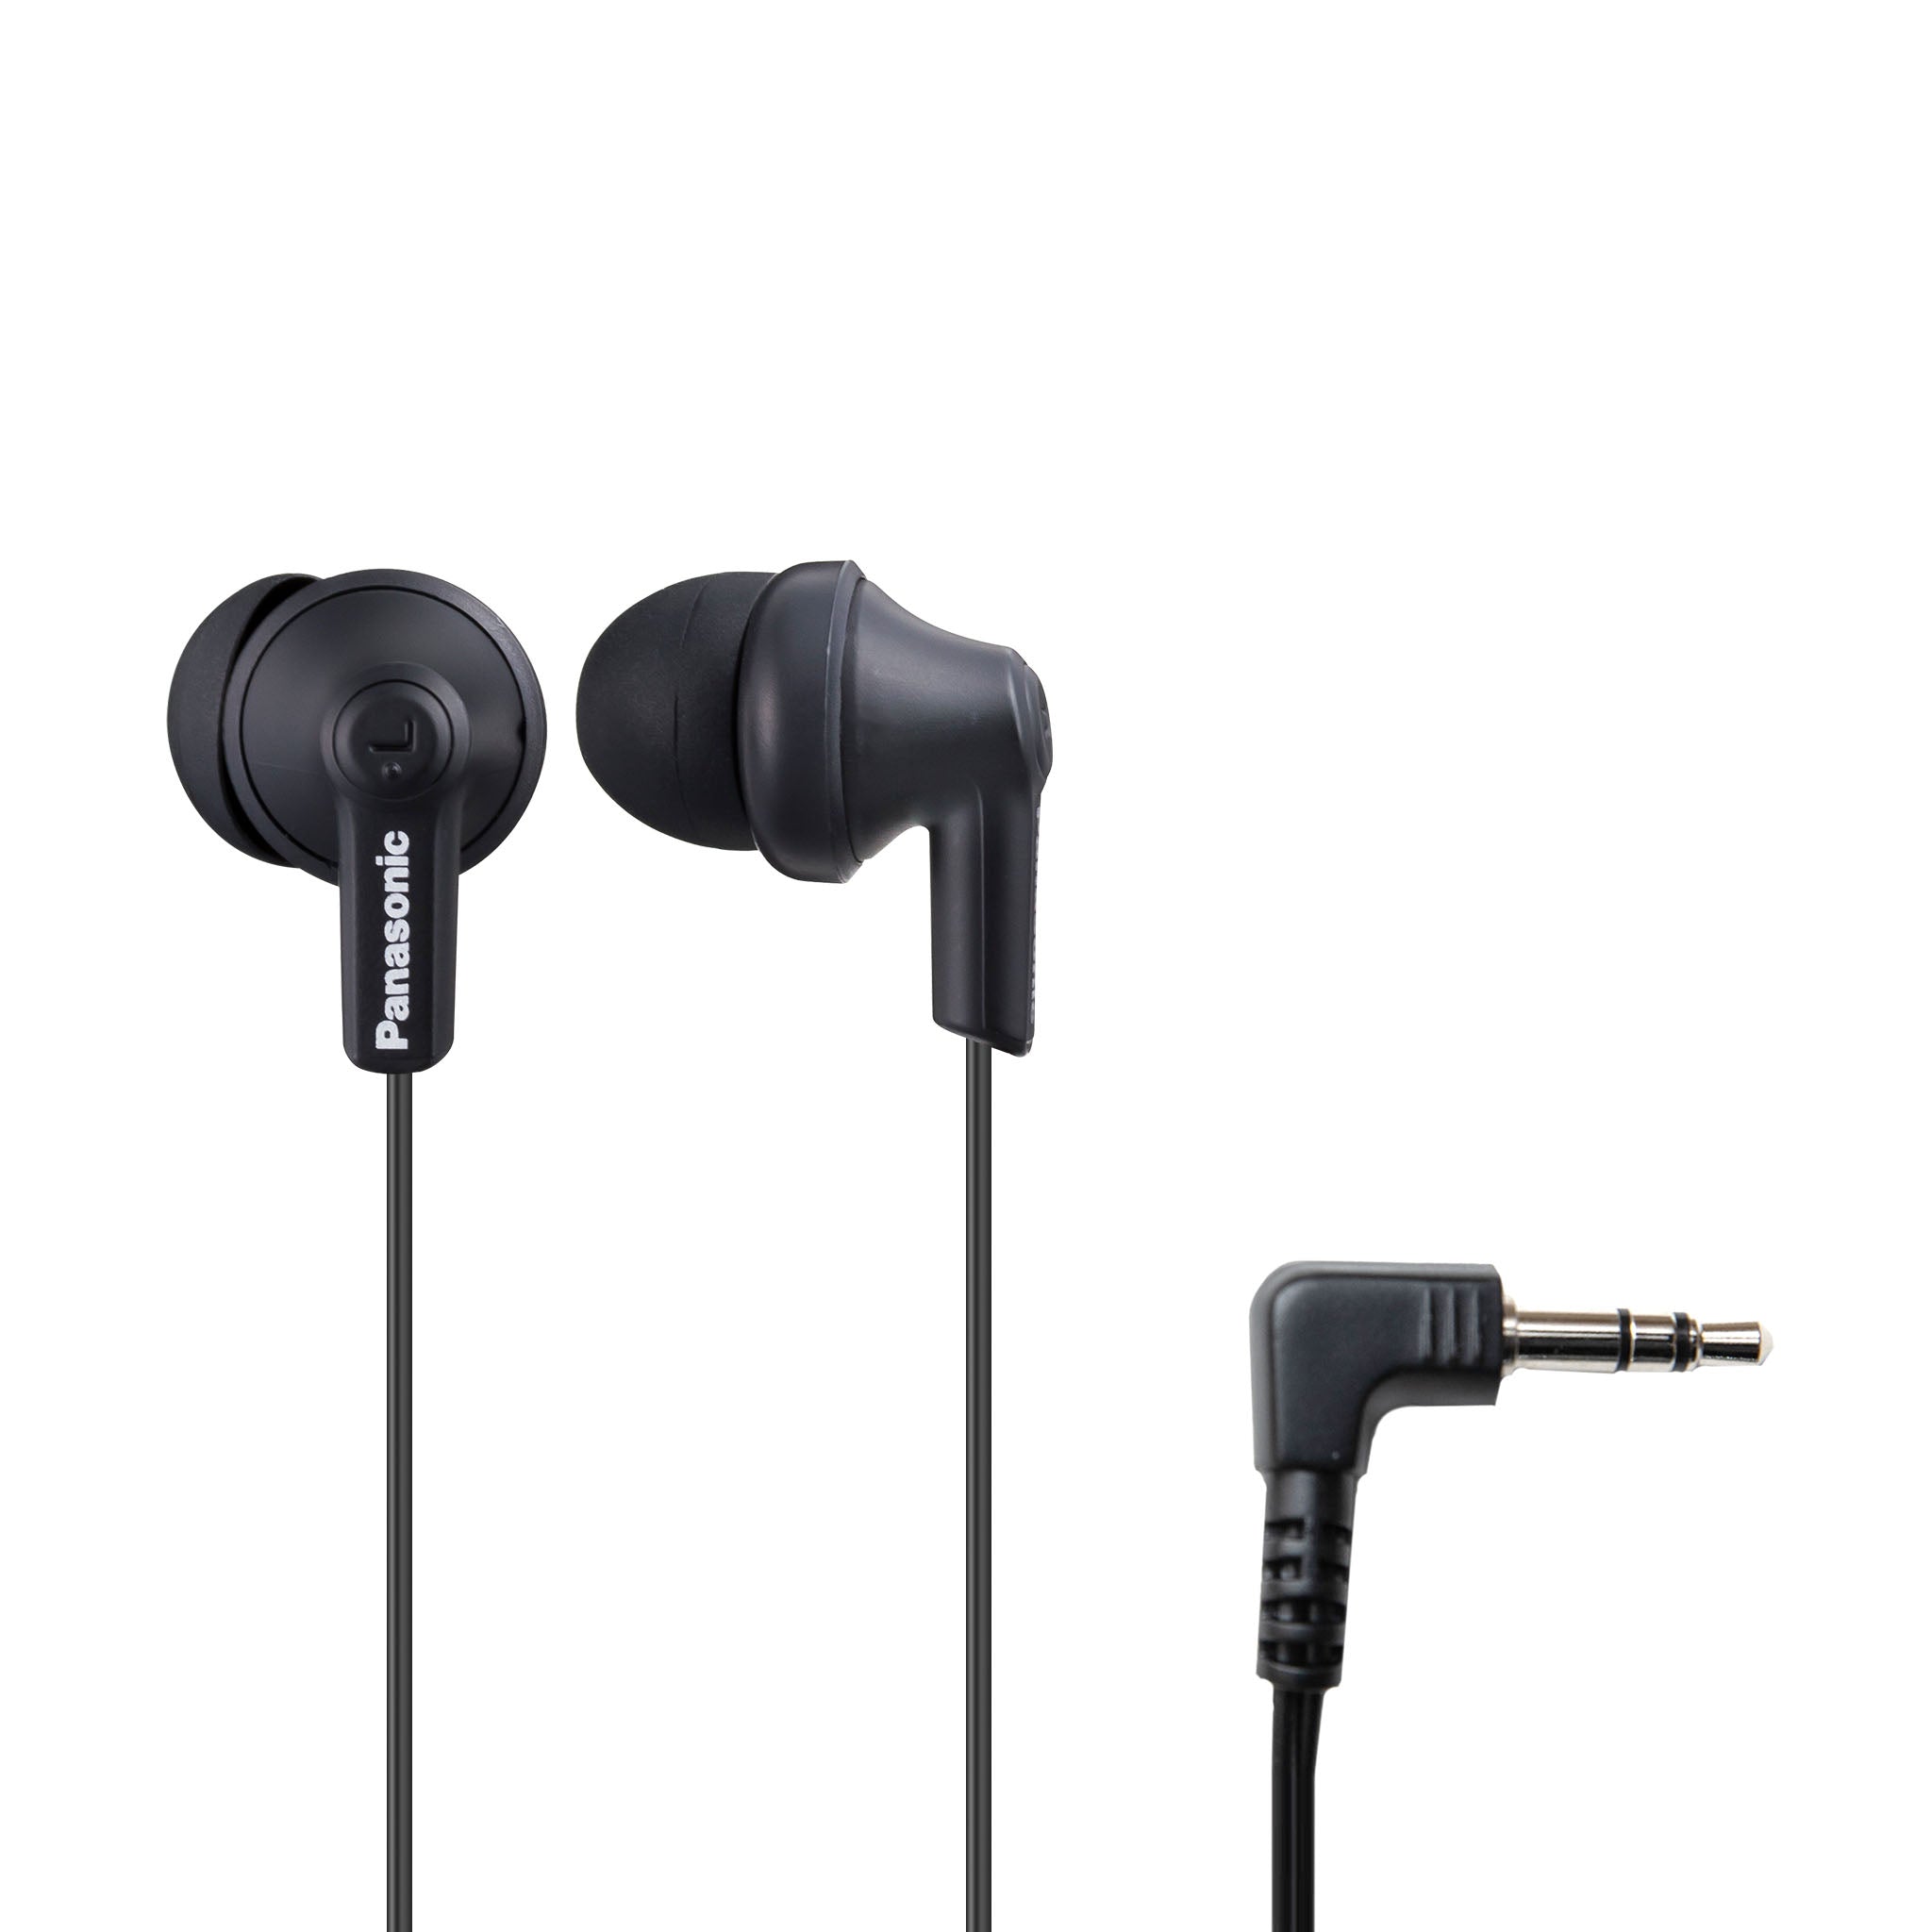 Panasonic ErgoFit for - Phones 3.5mm In-Ear and Laptops Jack Earbud with RP-HJE120 Headphones